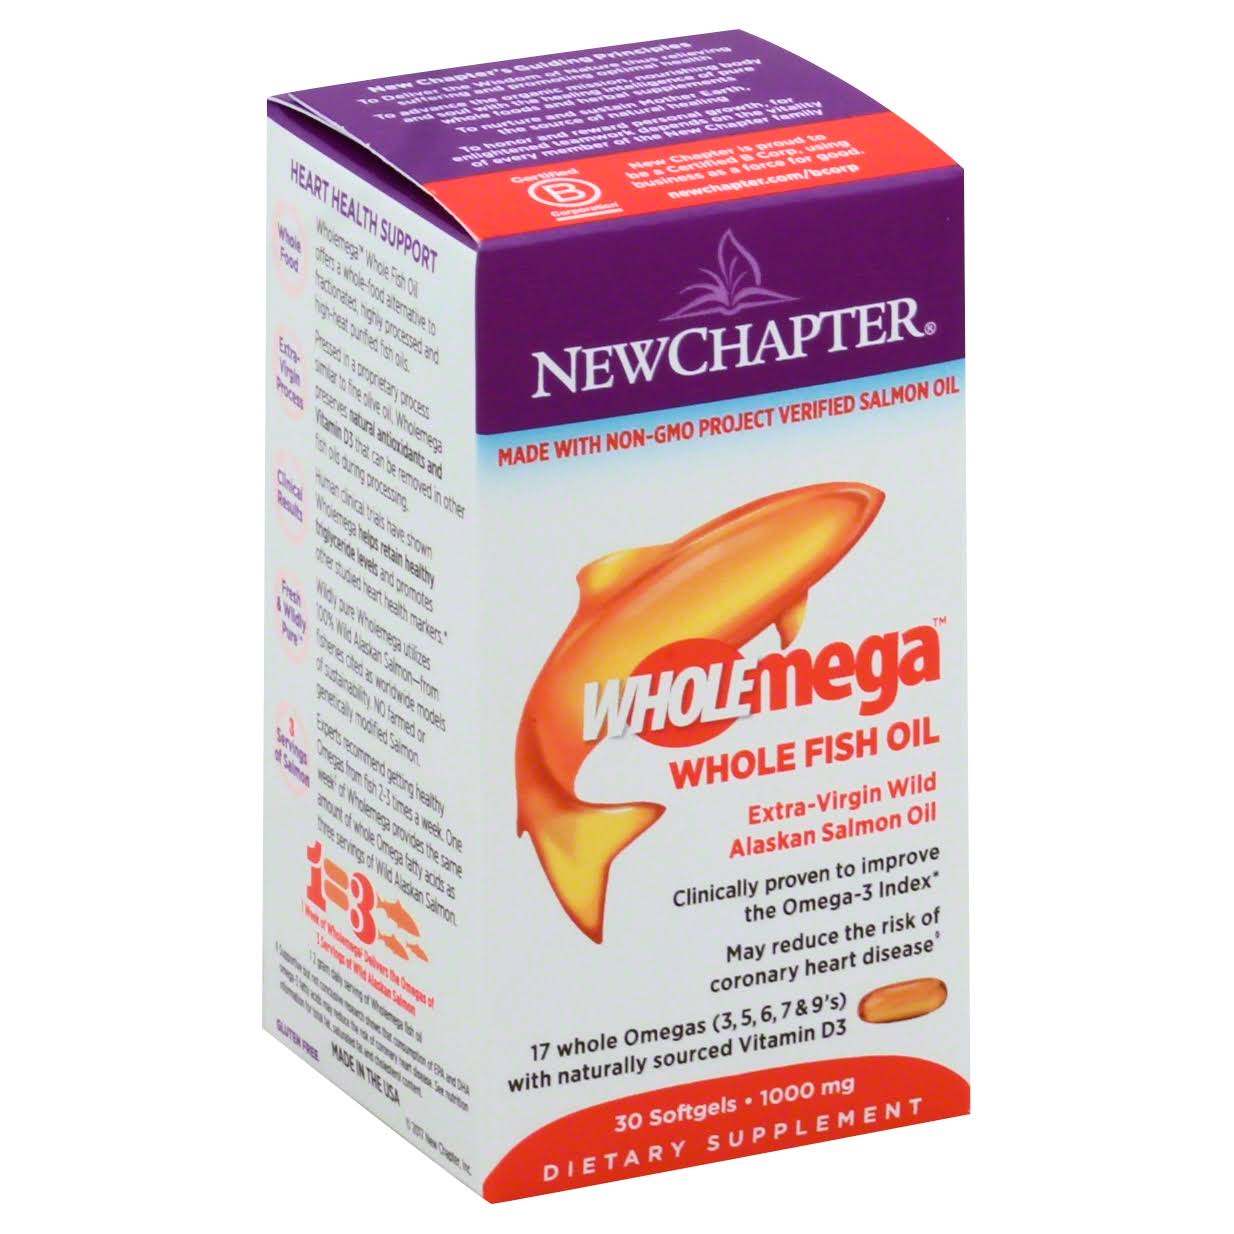 New Chapter Wholemega Extra Pure Fish Oil - 30 Capsules